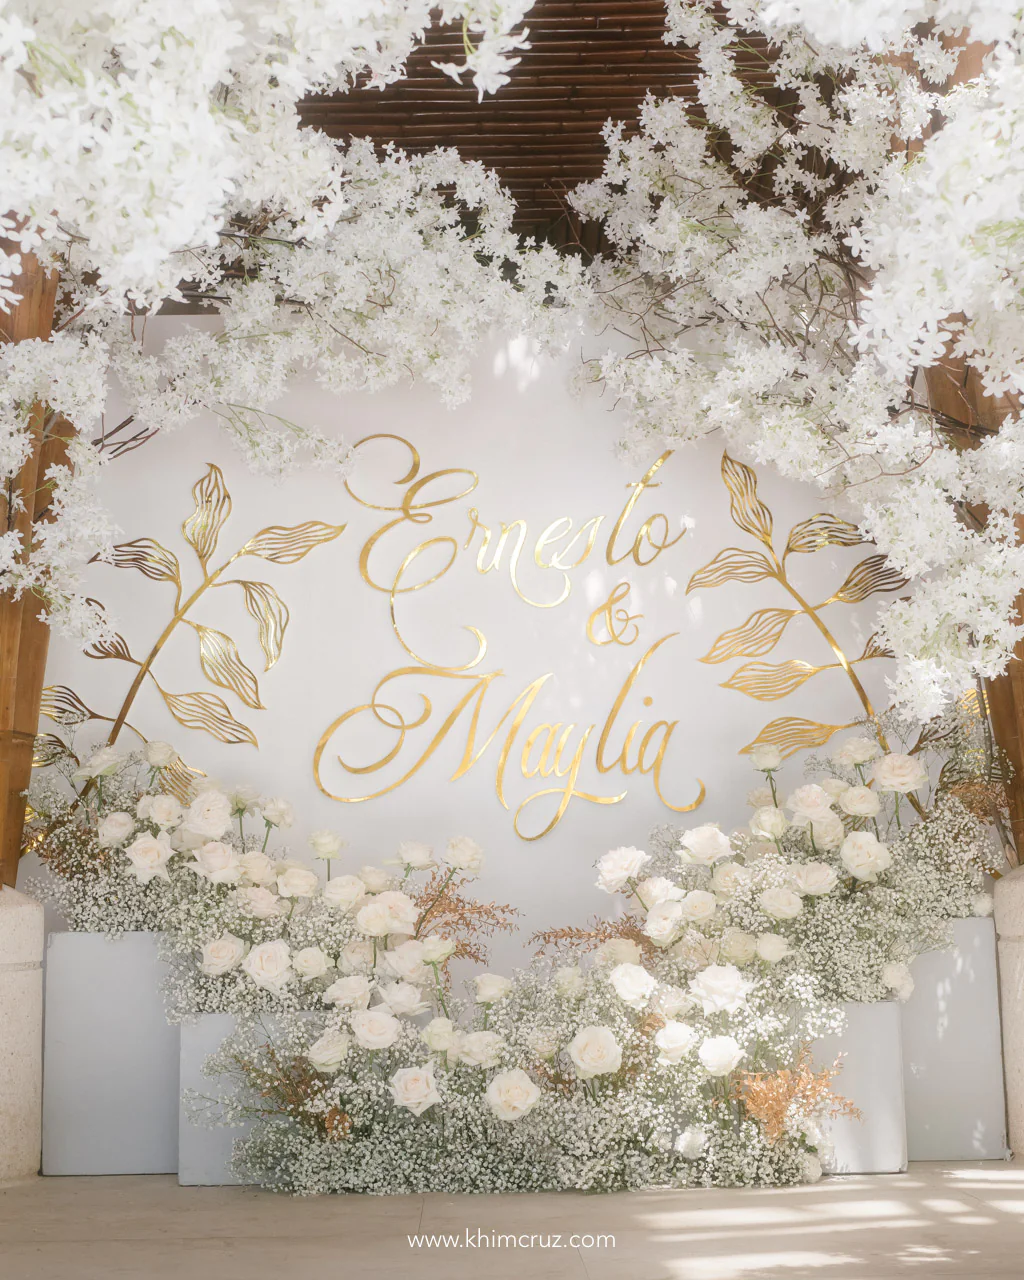 all white 50th wedding anniversary photowall for Ernesto and Maylia